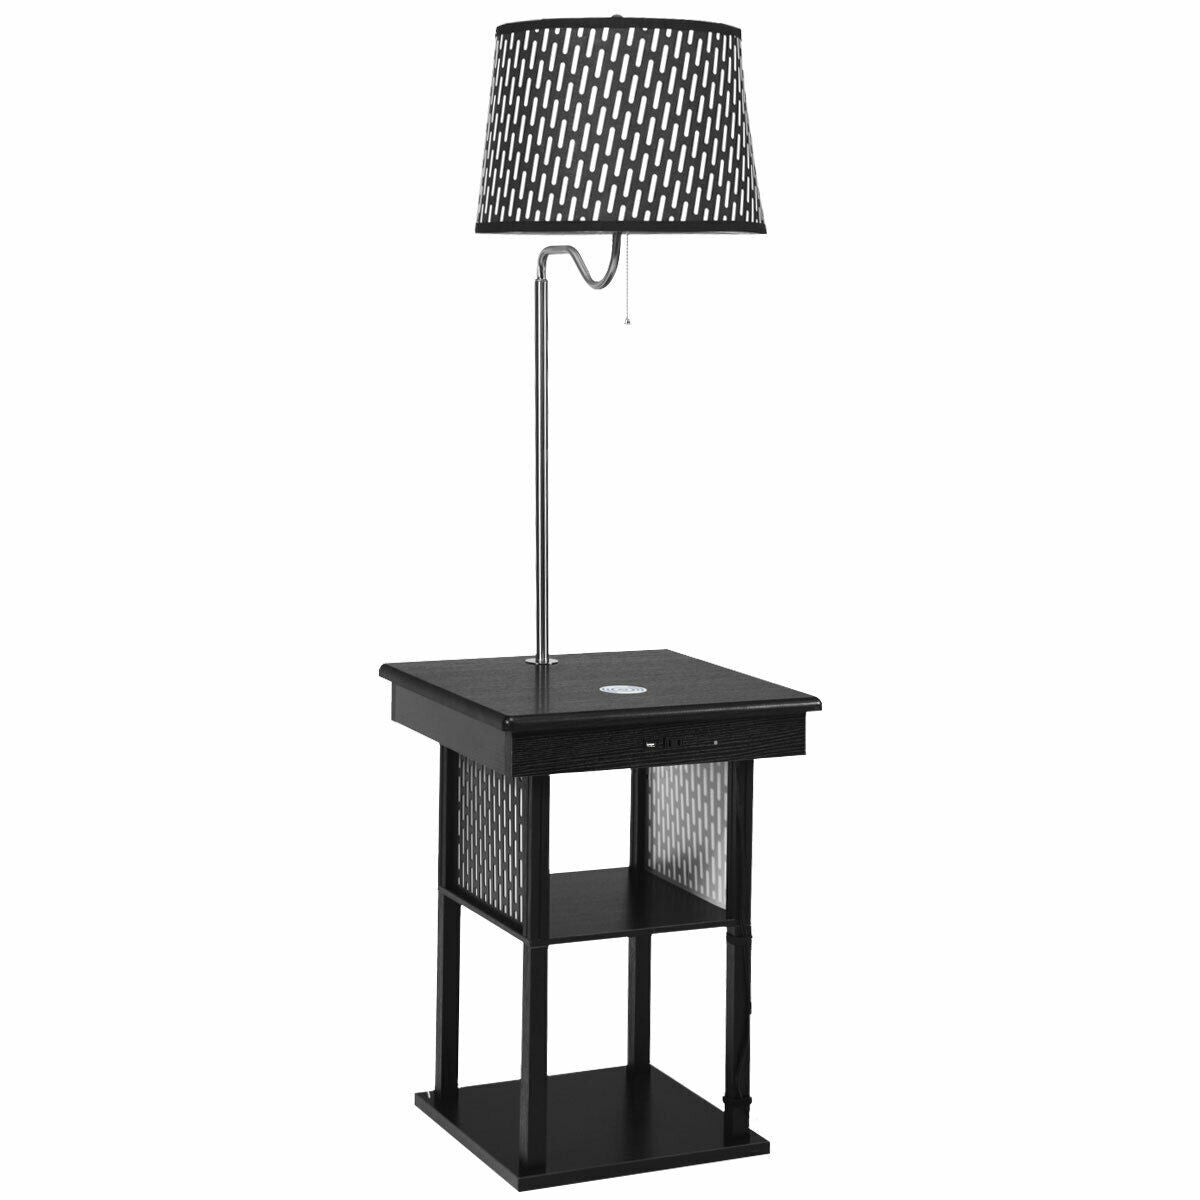 Floor Lamp, Swing Arm Lamp w/Shade Built in End Table Includes 2 USB Ports (Black Shade)